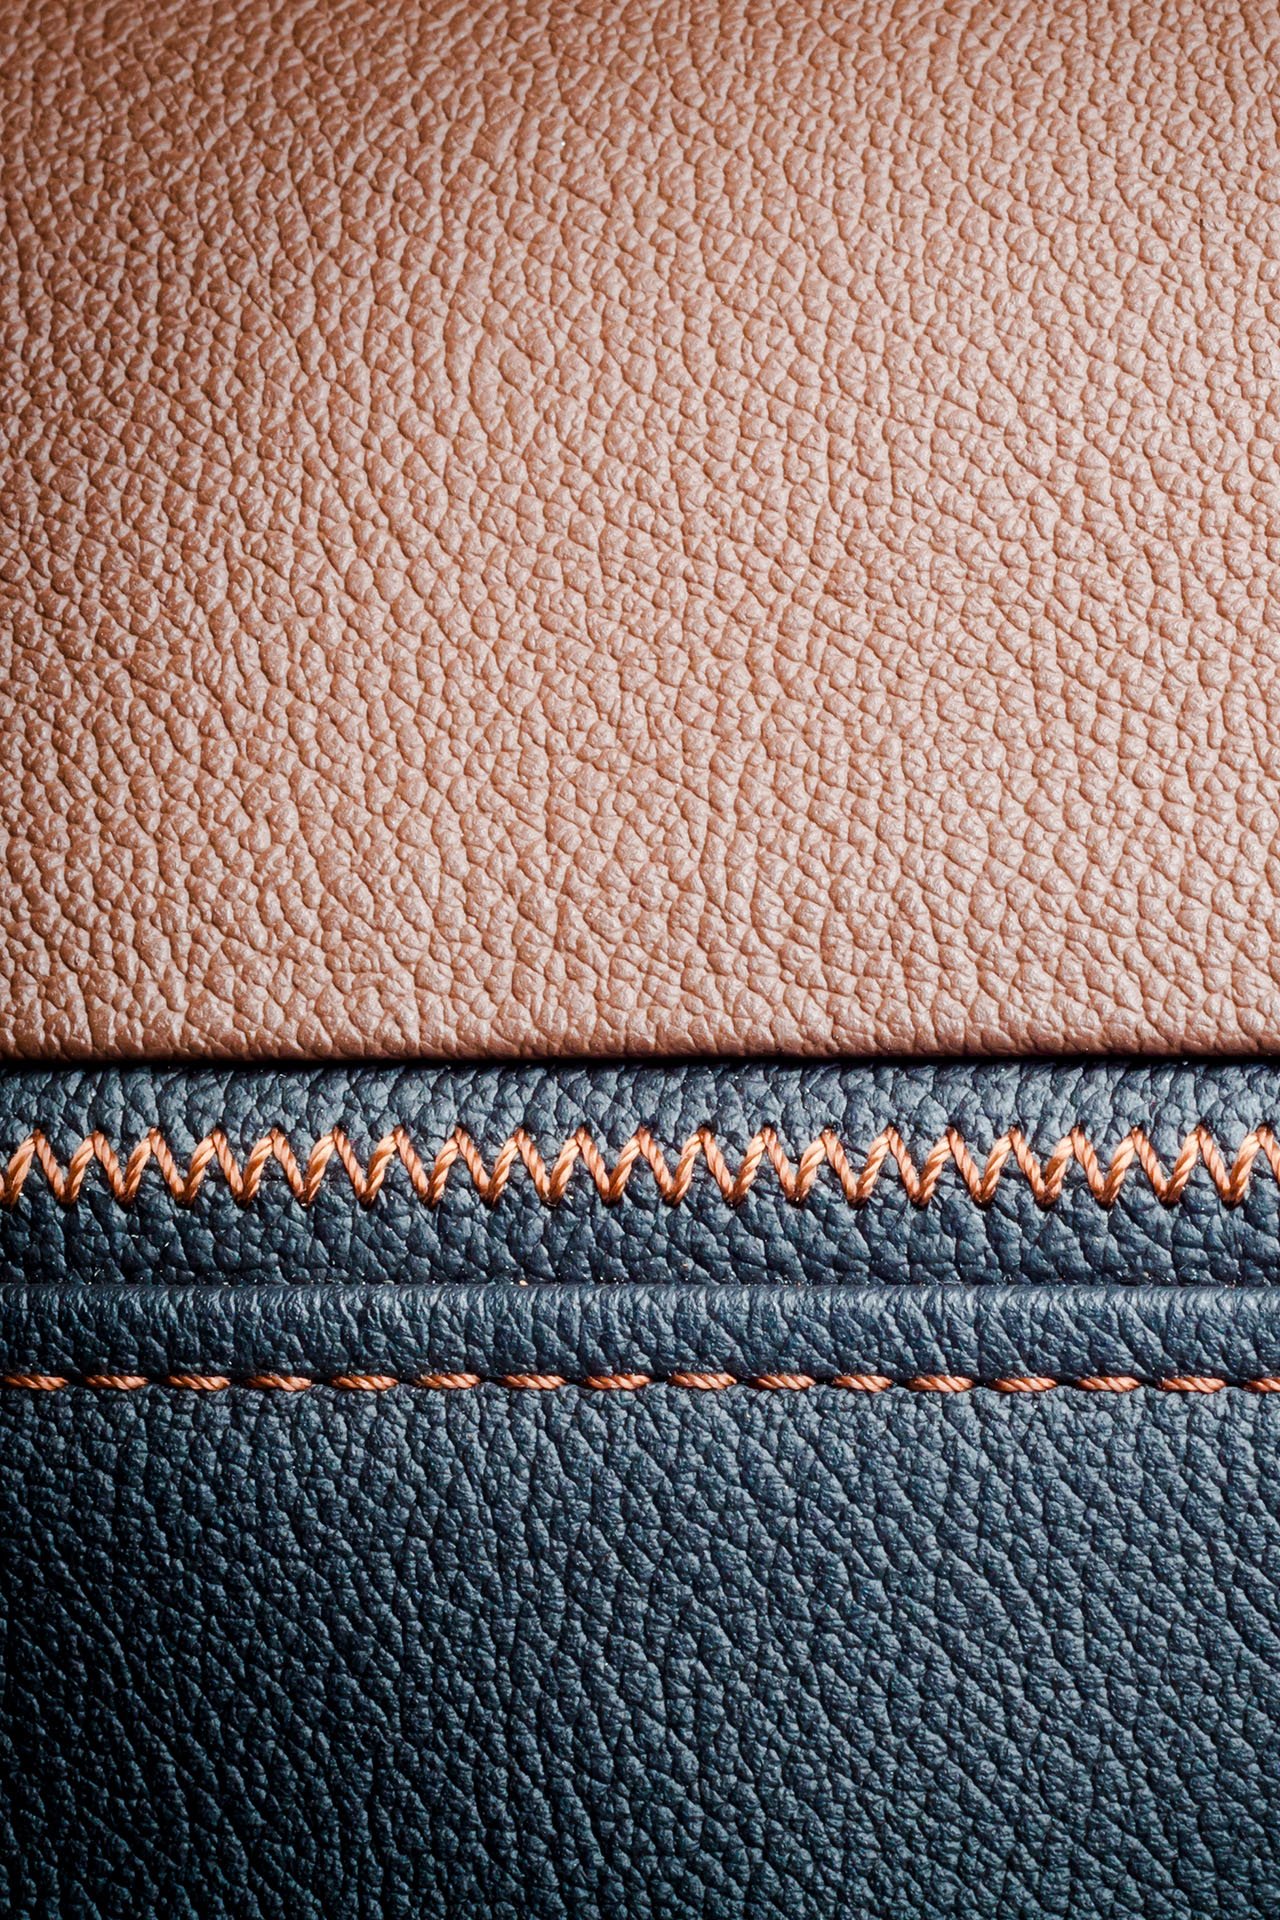 Brown leather and black leather with brown stitching